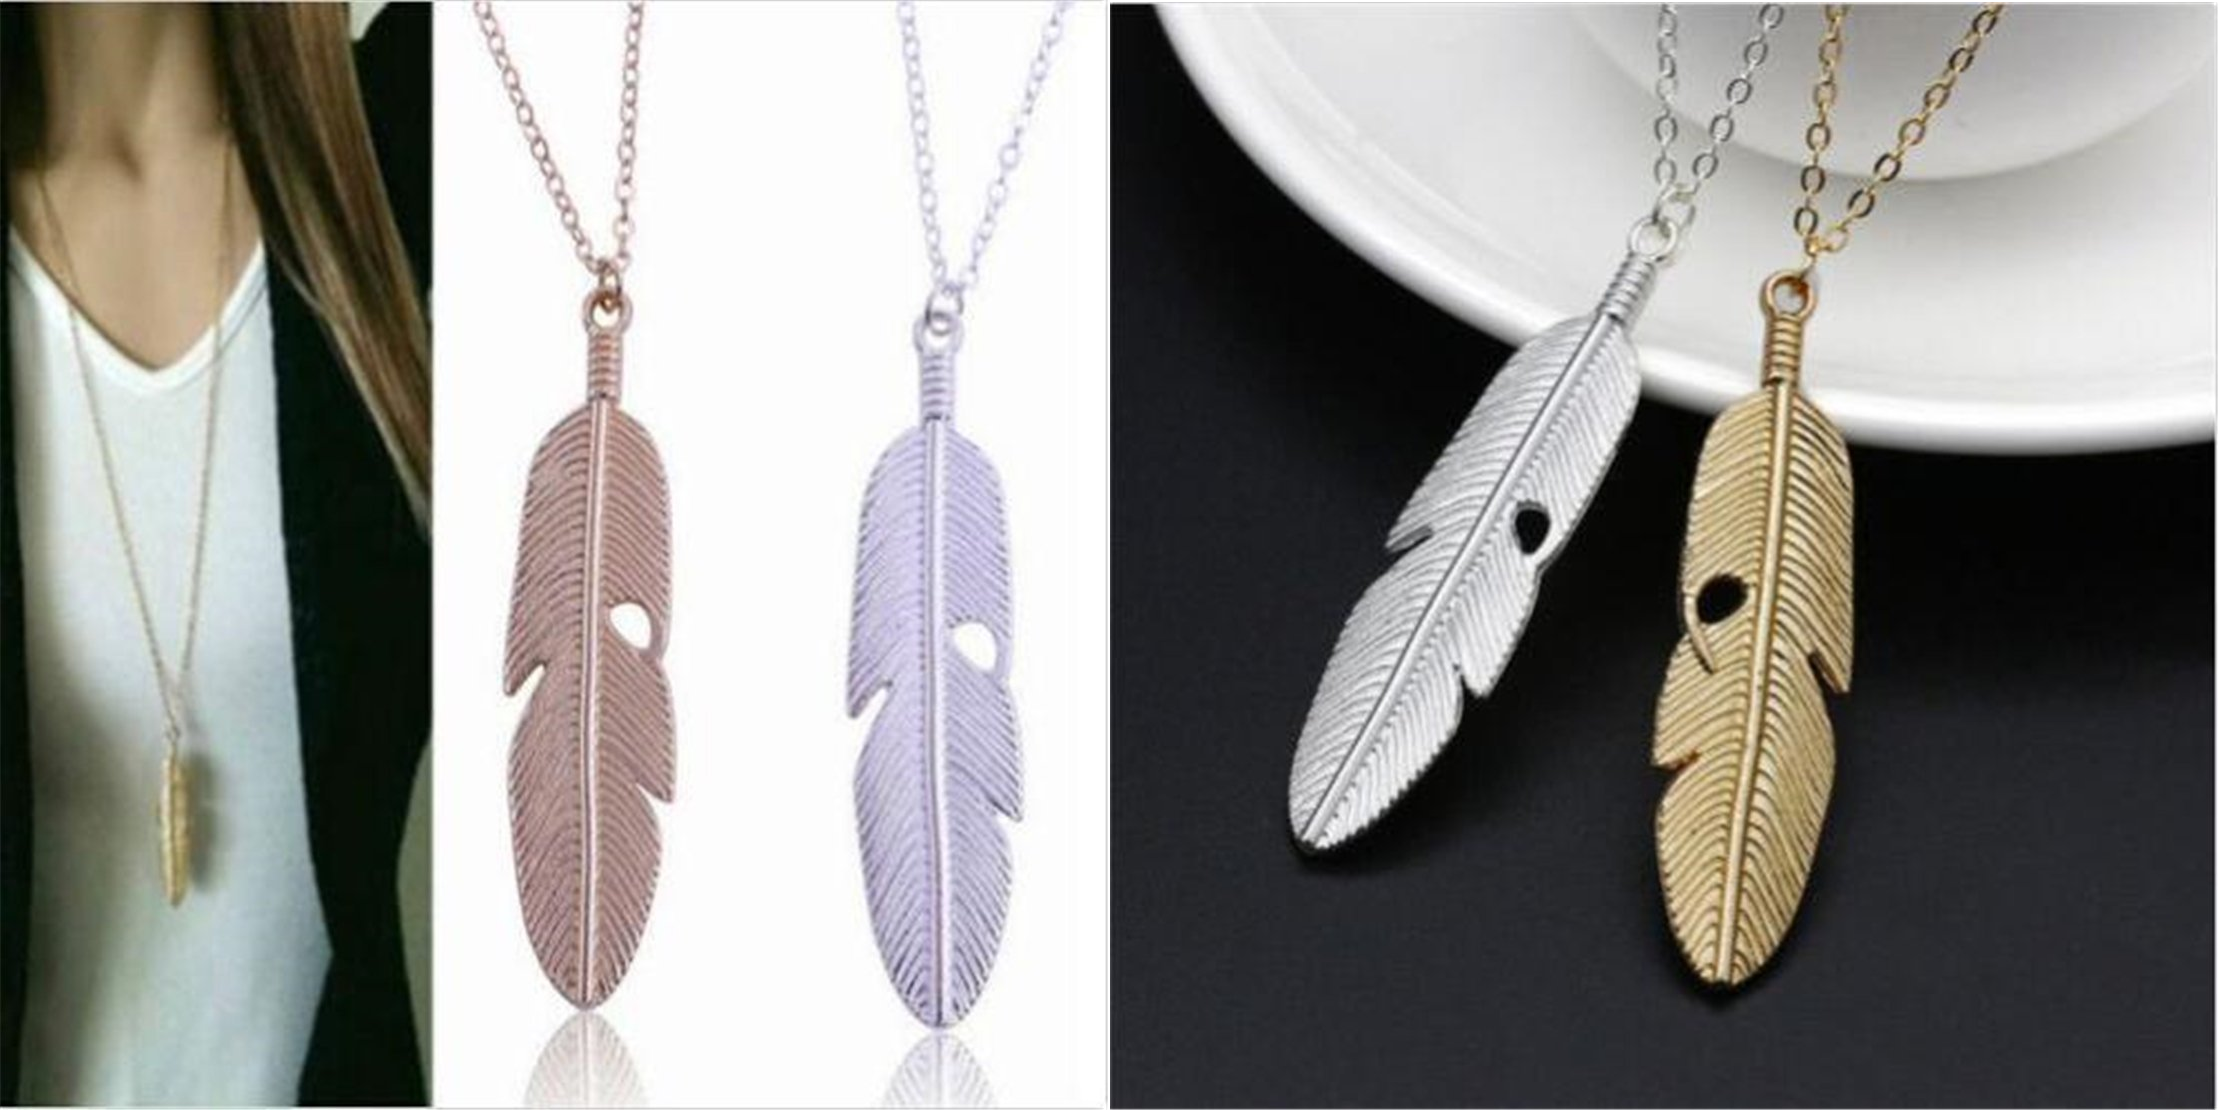 Chic Feather Pendant Necklace Only $1.83 Shipped!